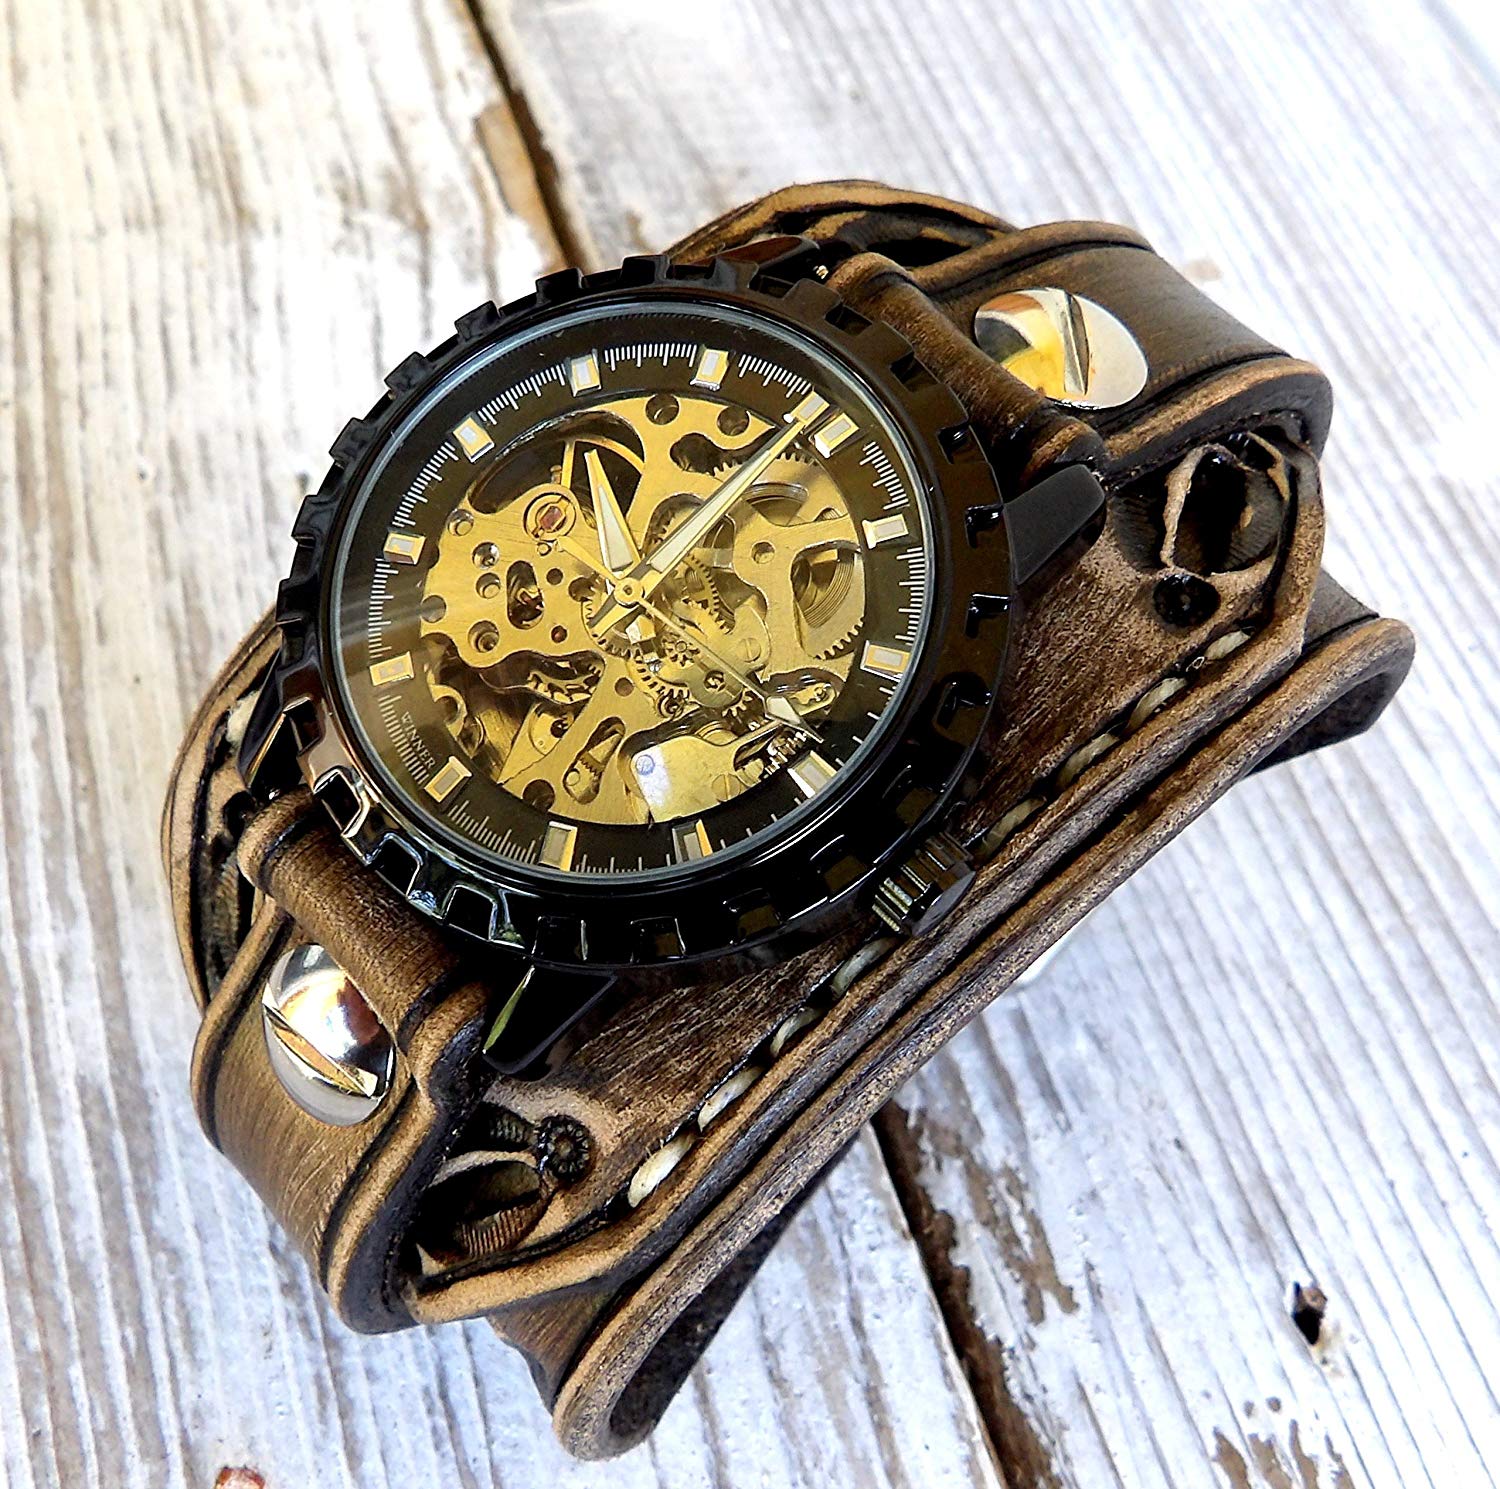 Steampunk Watches for Both Men and Women